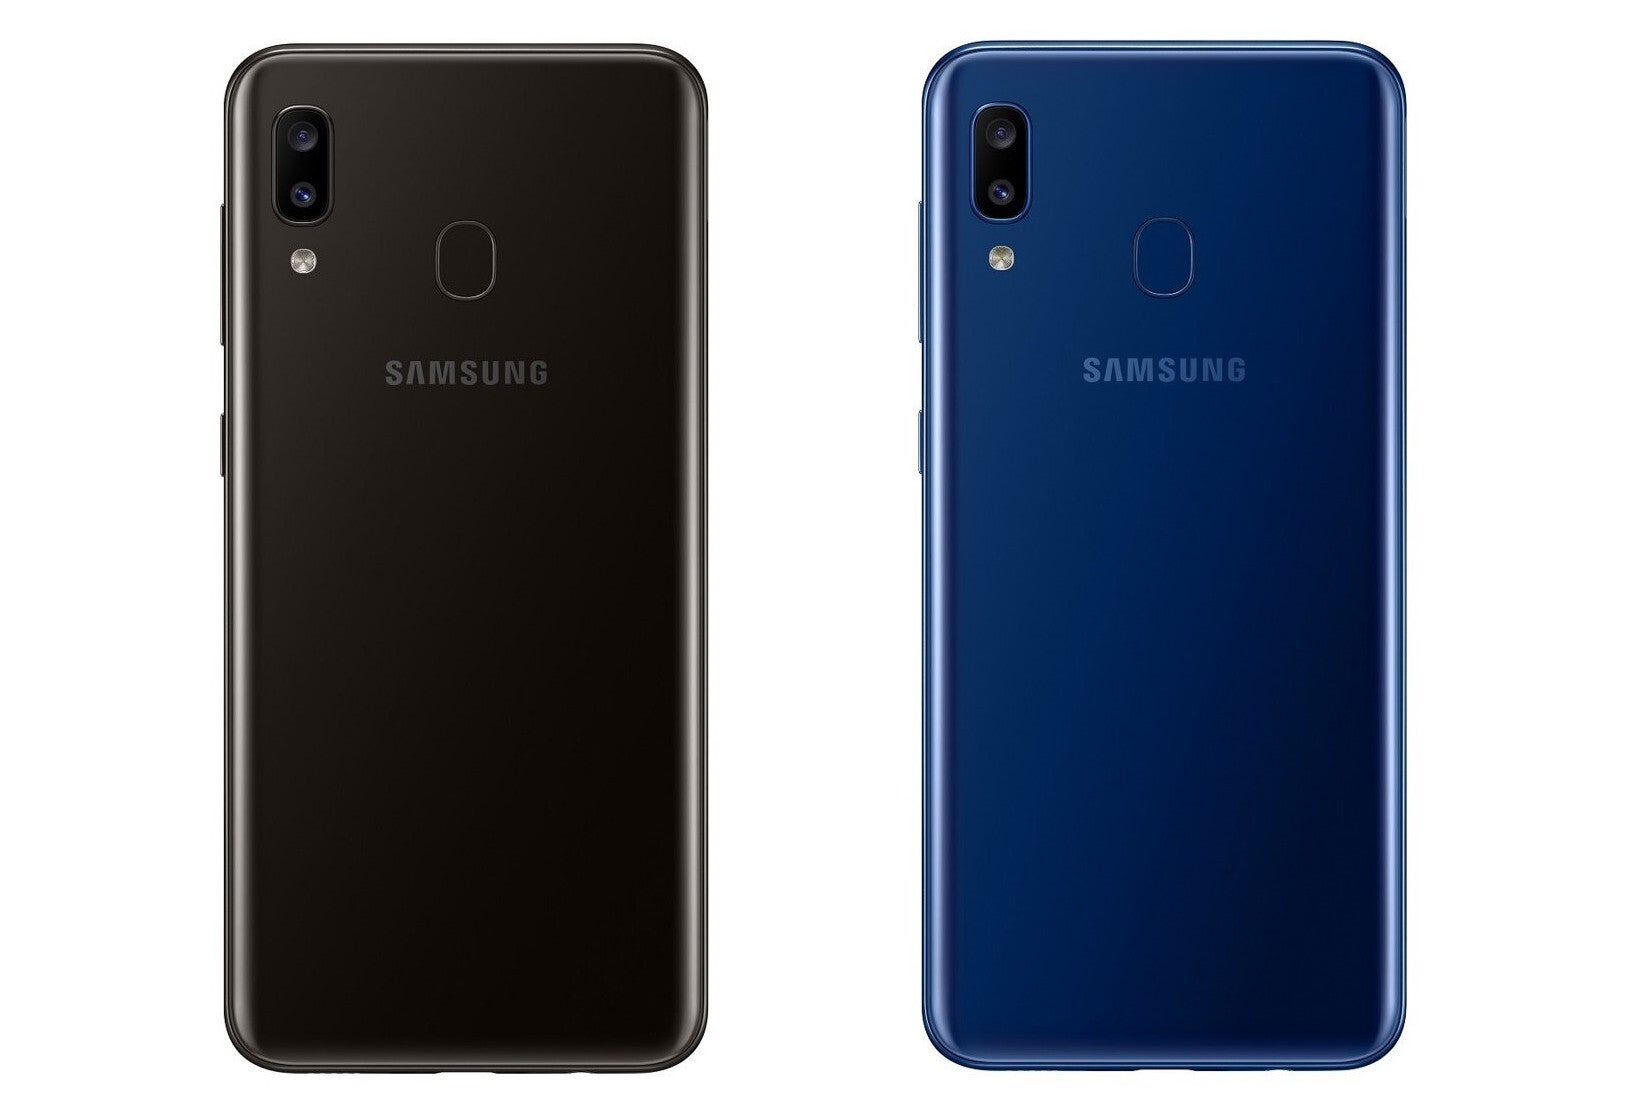 Samsung Galaxy A20 - Samsung Galaxy A20 and A10e coming to T-Mobile, the latter will cost as low as $0